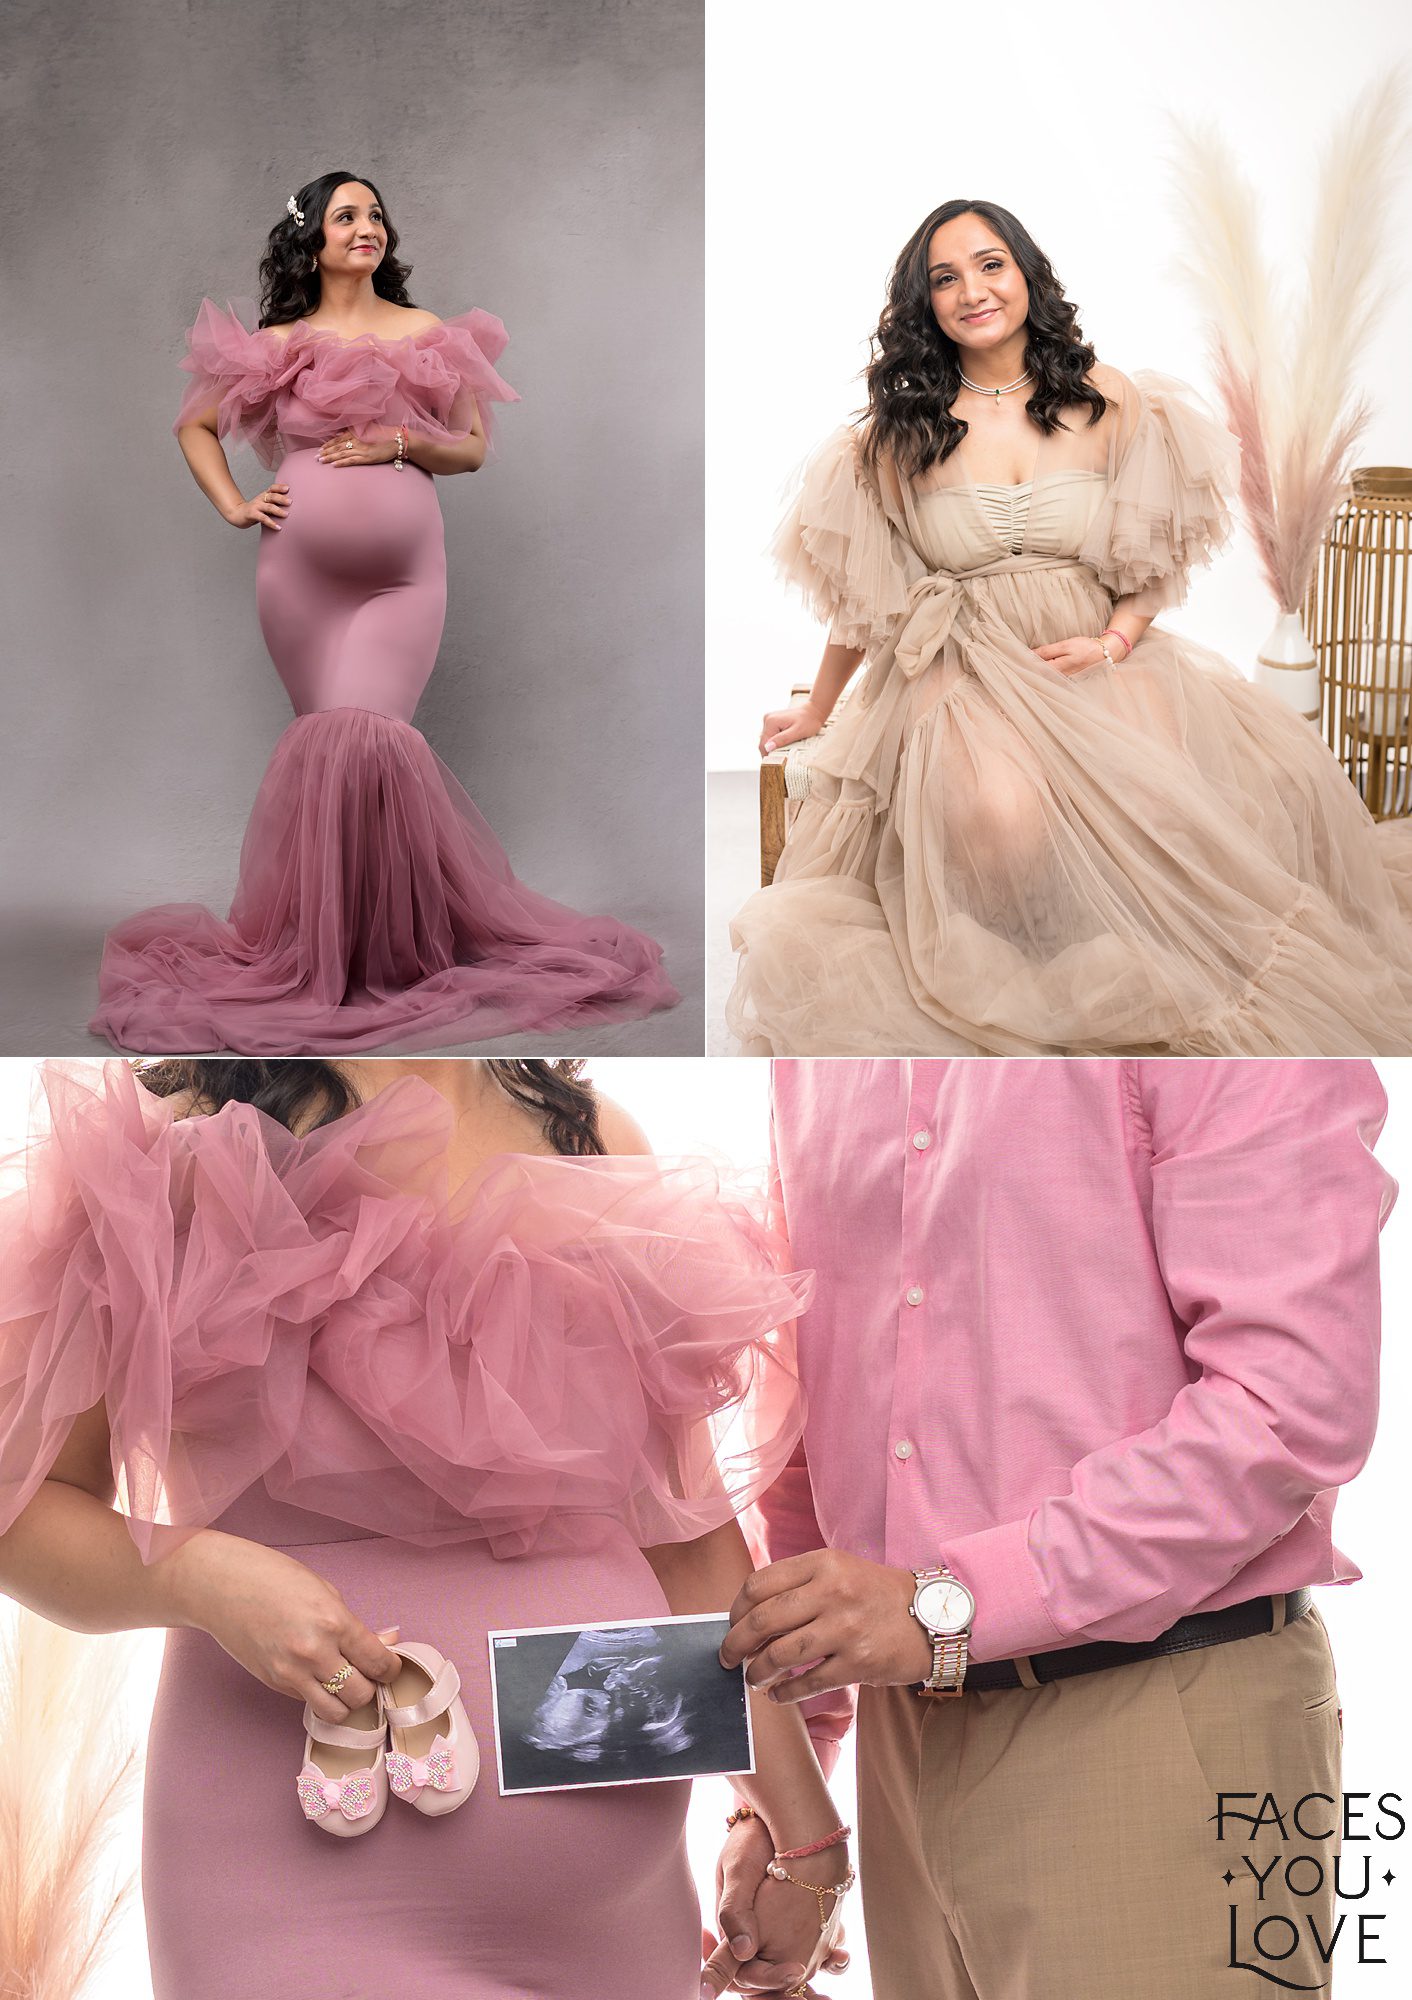 Female maternity session, photographed on a gray and white background. She's wearing pink and beige gowns while holding mini, light pink shoes. Photo session was in Faces You Love studio in Overland Park, KS.